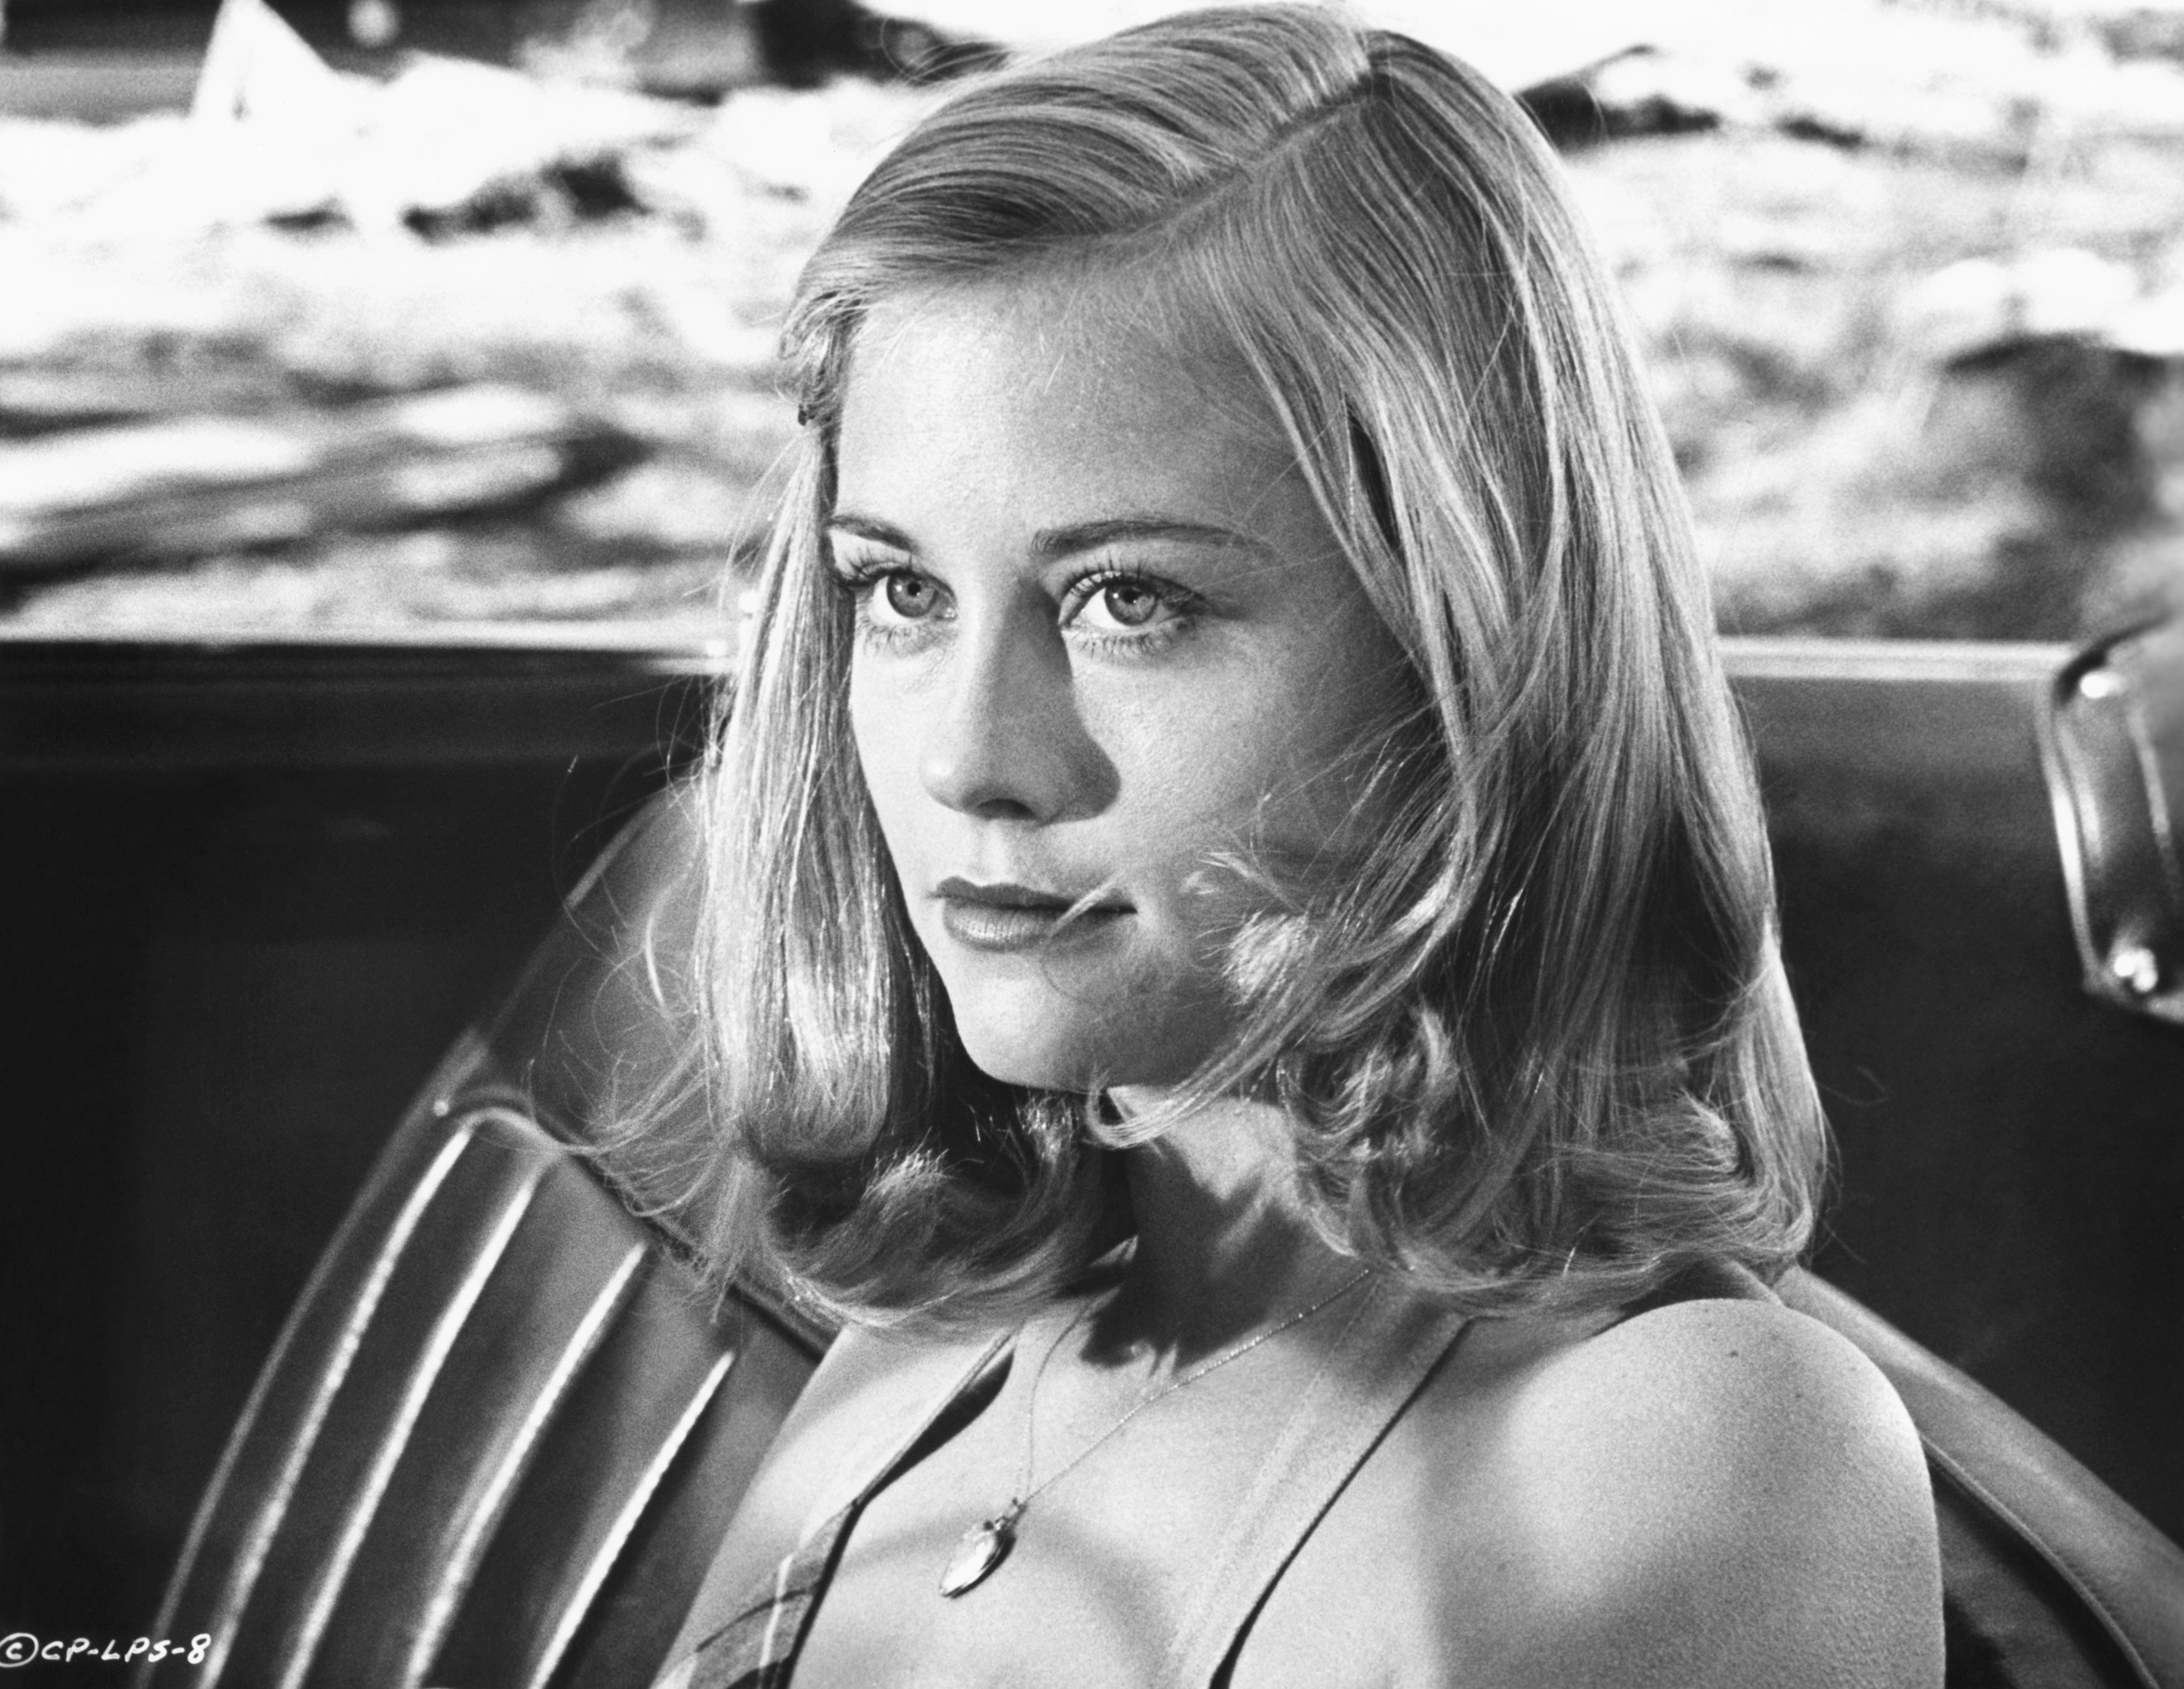 Cybill Shepherd while filming "The Last Picture Show," circa 1971. | Source: Getty Images